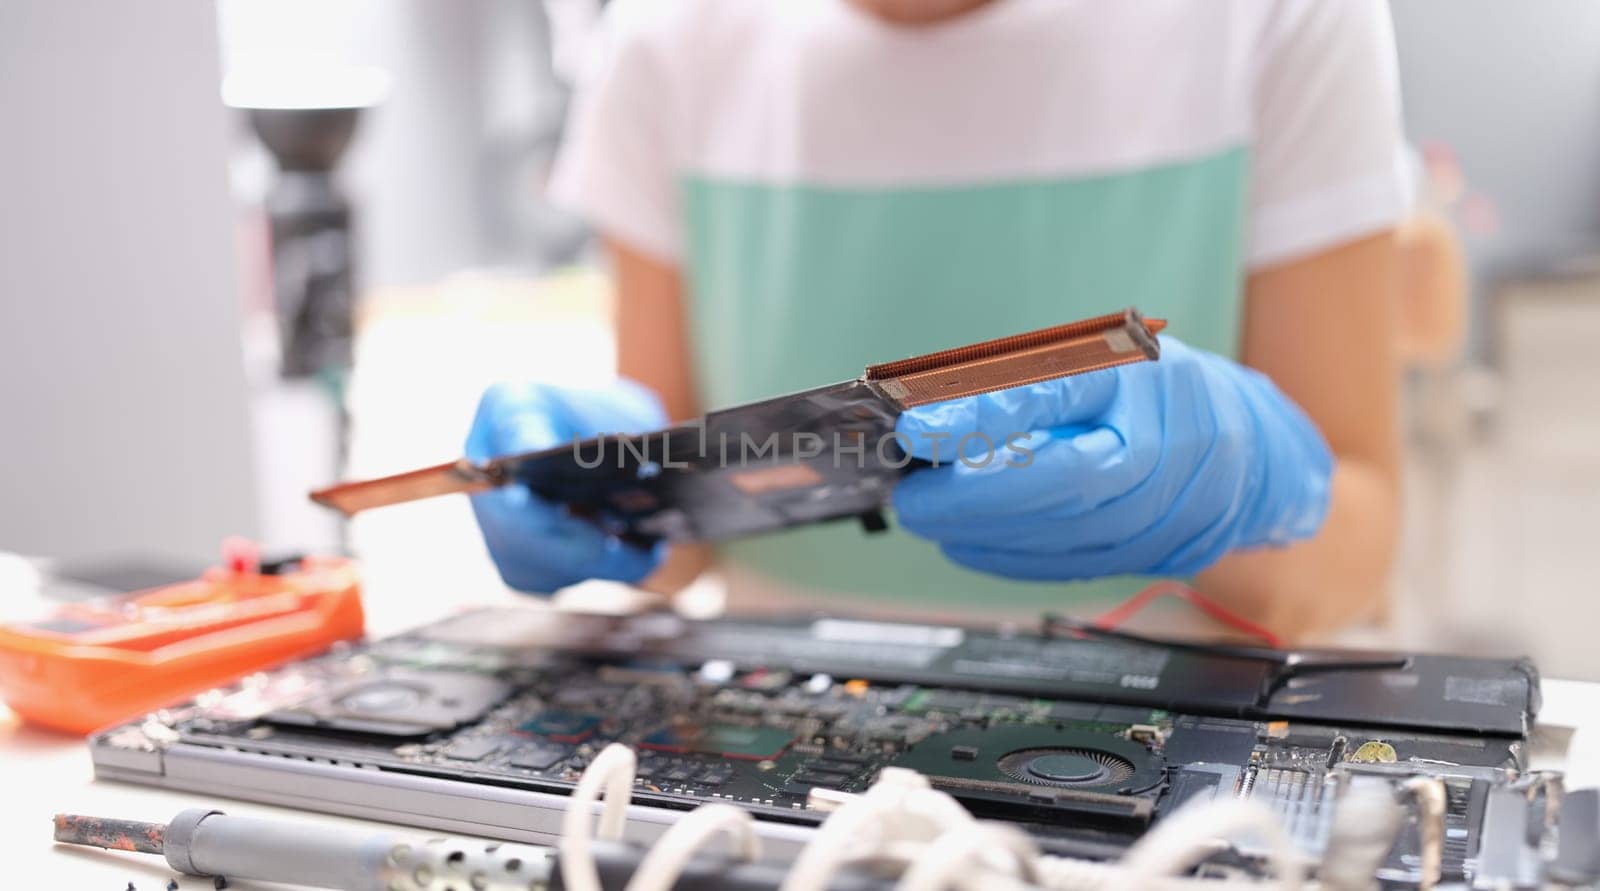 Technical engineer is working on computer motherboard. Repair of computer equipment concept